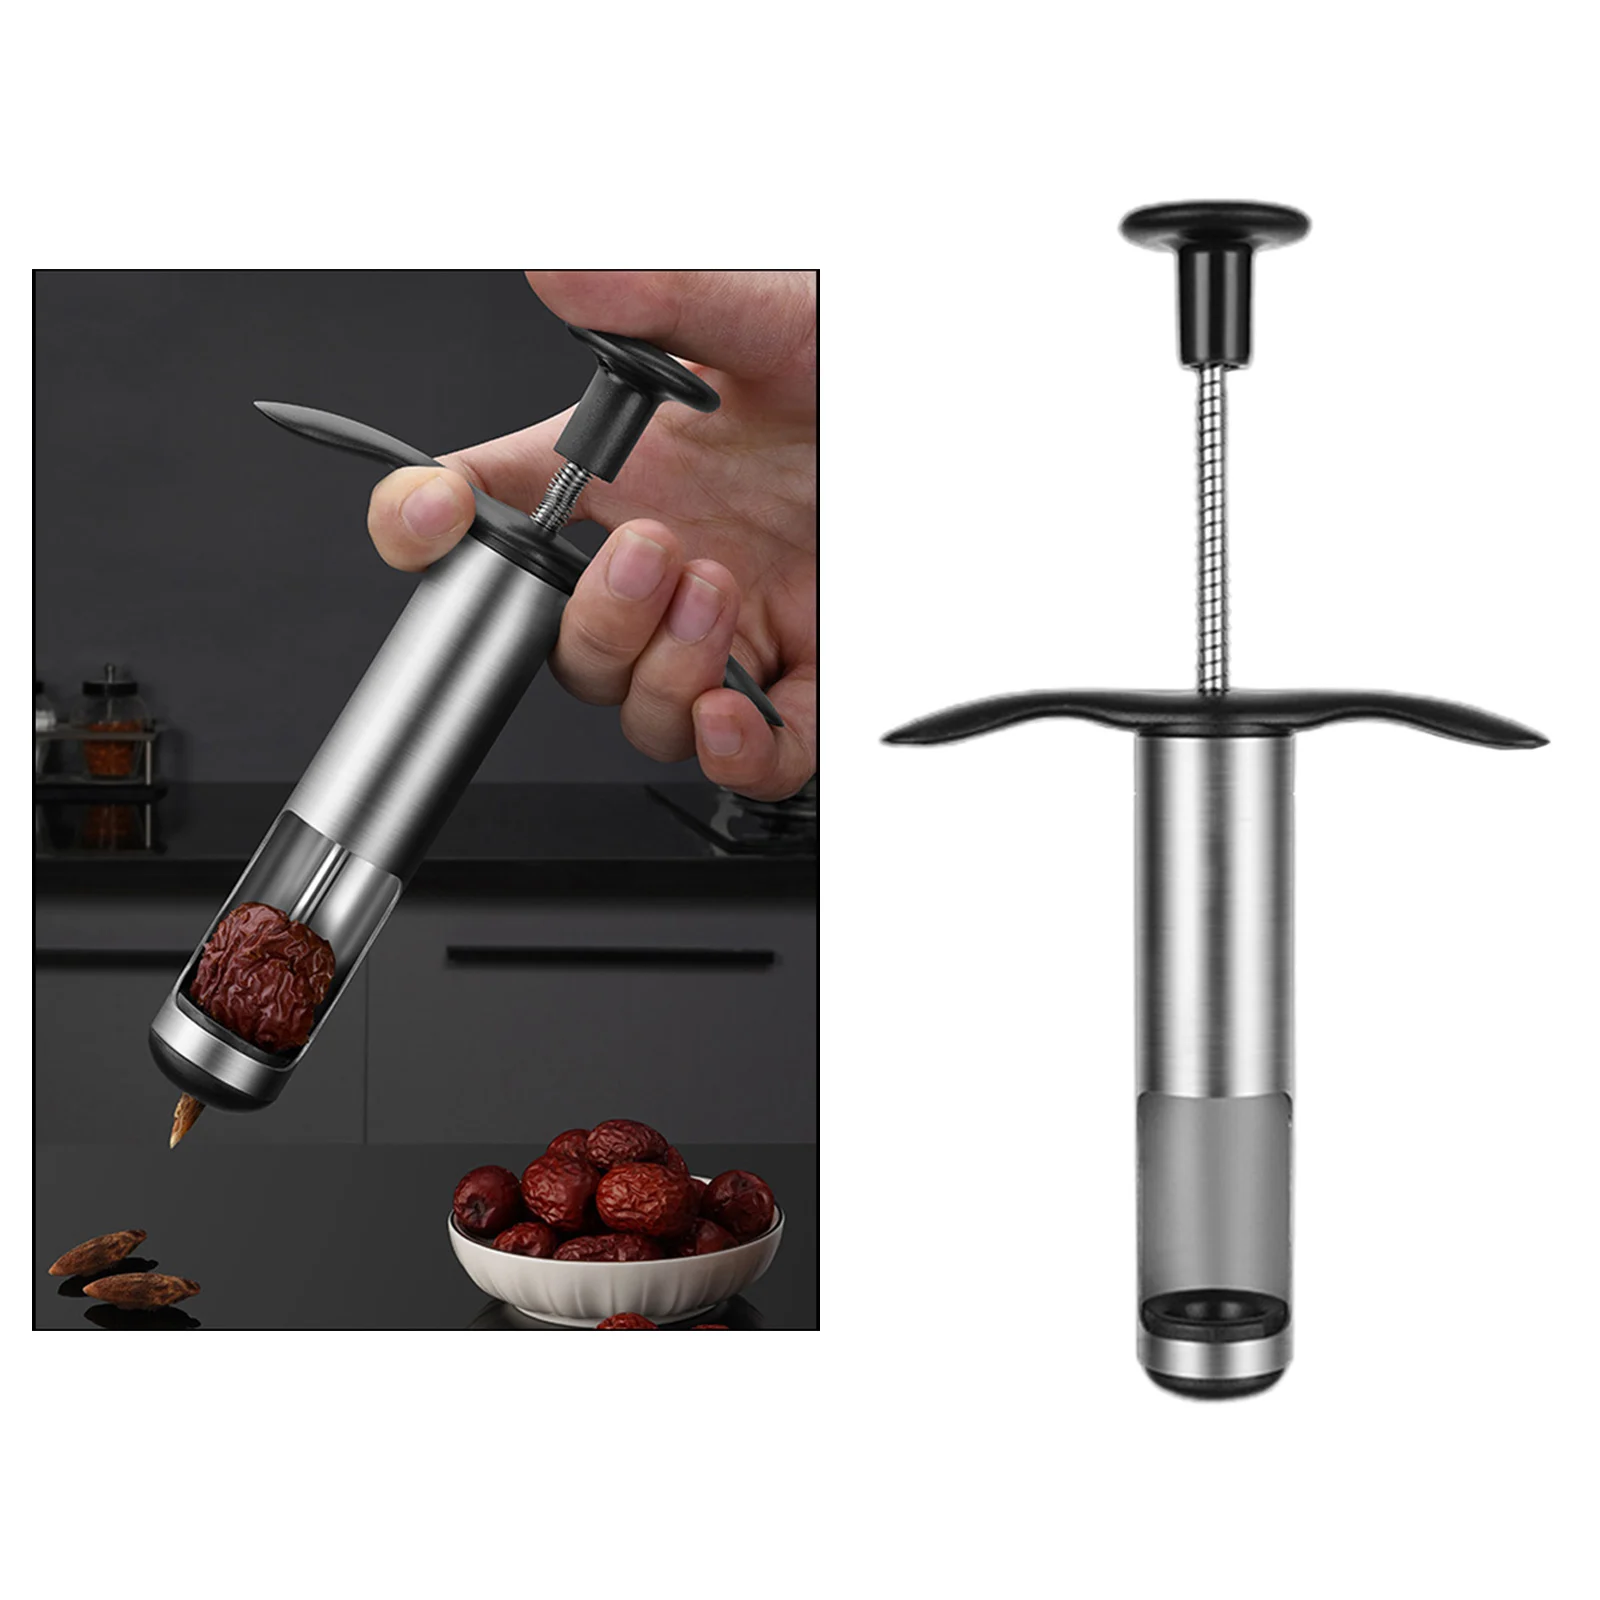 Stainless Steel Core Remover Push Type Fruit Pineapple Peeler Corer for Pear Cherry Red Date Jujube Home Kitchen Accessories